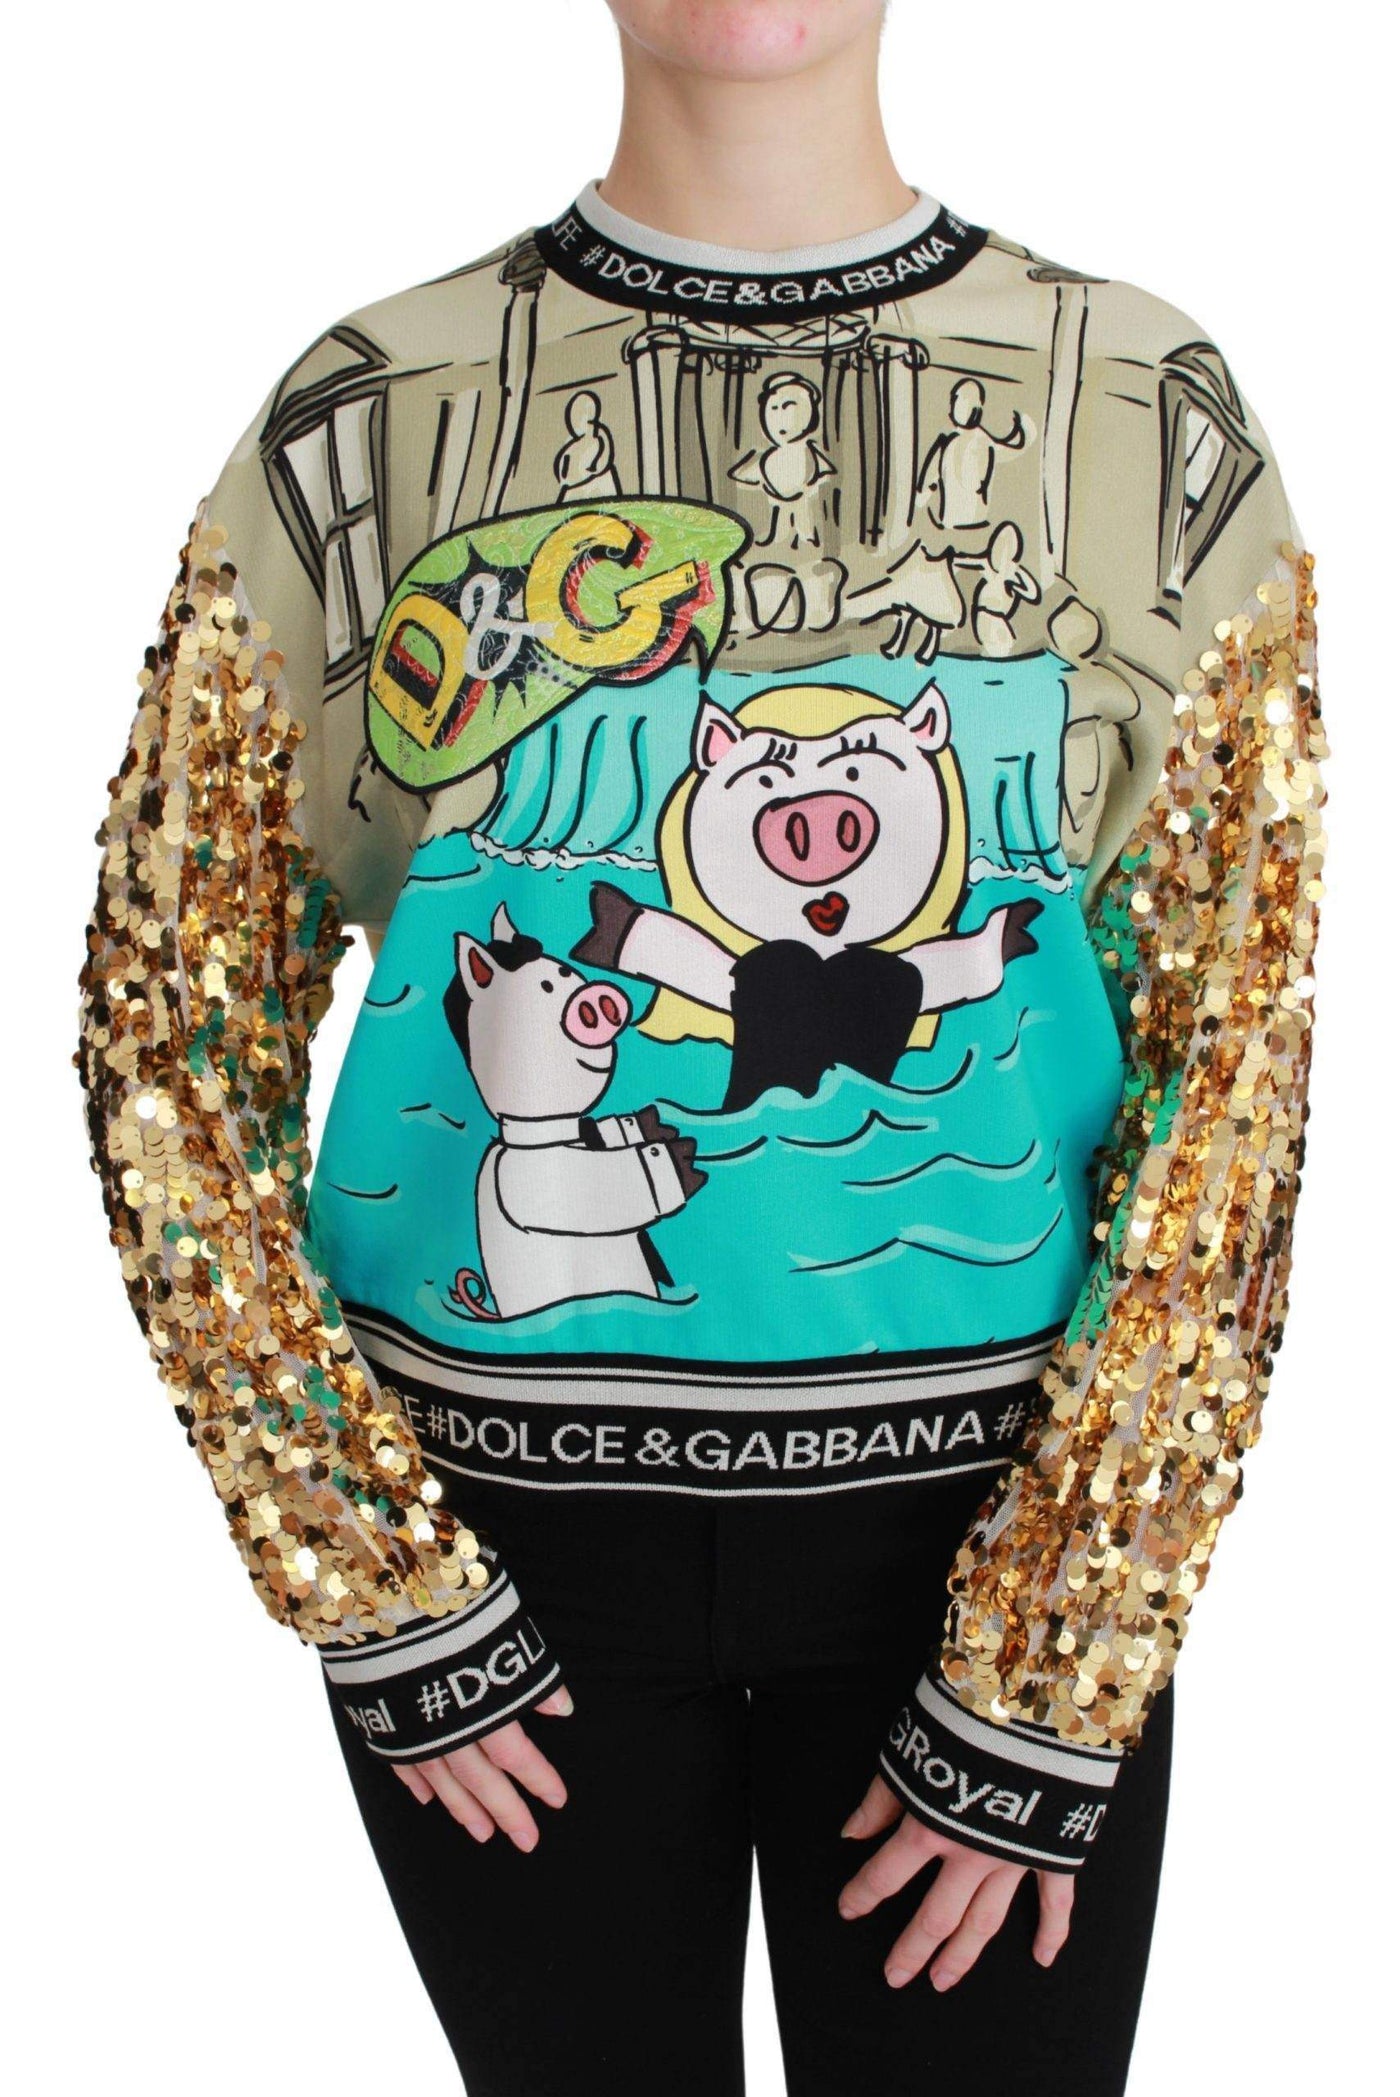 Dolce & Gabbana  Year of the Pig Sequined Top  Sweater #women, Brand_Dolce & Gabbana, Catch, Dolce & Gabbana, feed-agegroup-adult, feed-color-multicolor, feed-gender-female, feed-size-IT36 | XS, feed-size-IT38 | S, feed-size-IT40|S, feed-size-IT42|M, feed-size-IT44|L, Gender_Women, IT36 | XS, IT38 | S, IT40|S, IT42|M, IT44|L, Kogan, Multicolor, Sweaters - Women - Clothing, Women - New Arrivals at SEYMAYKA